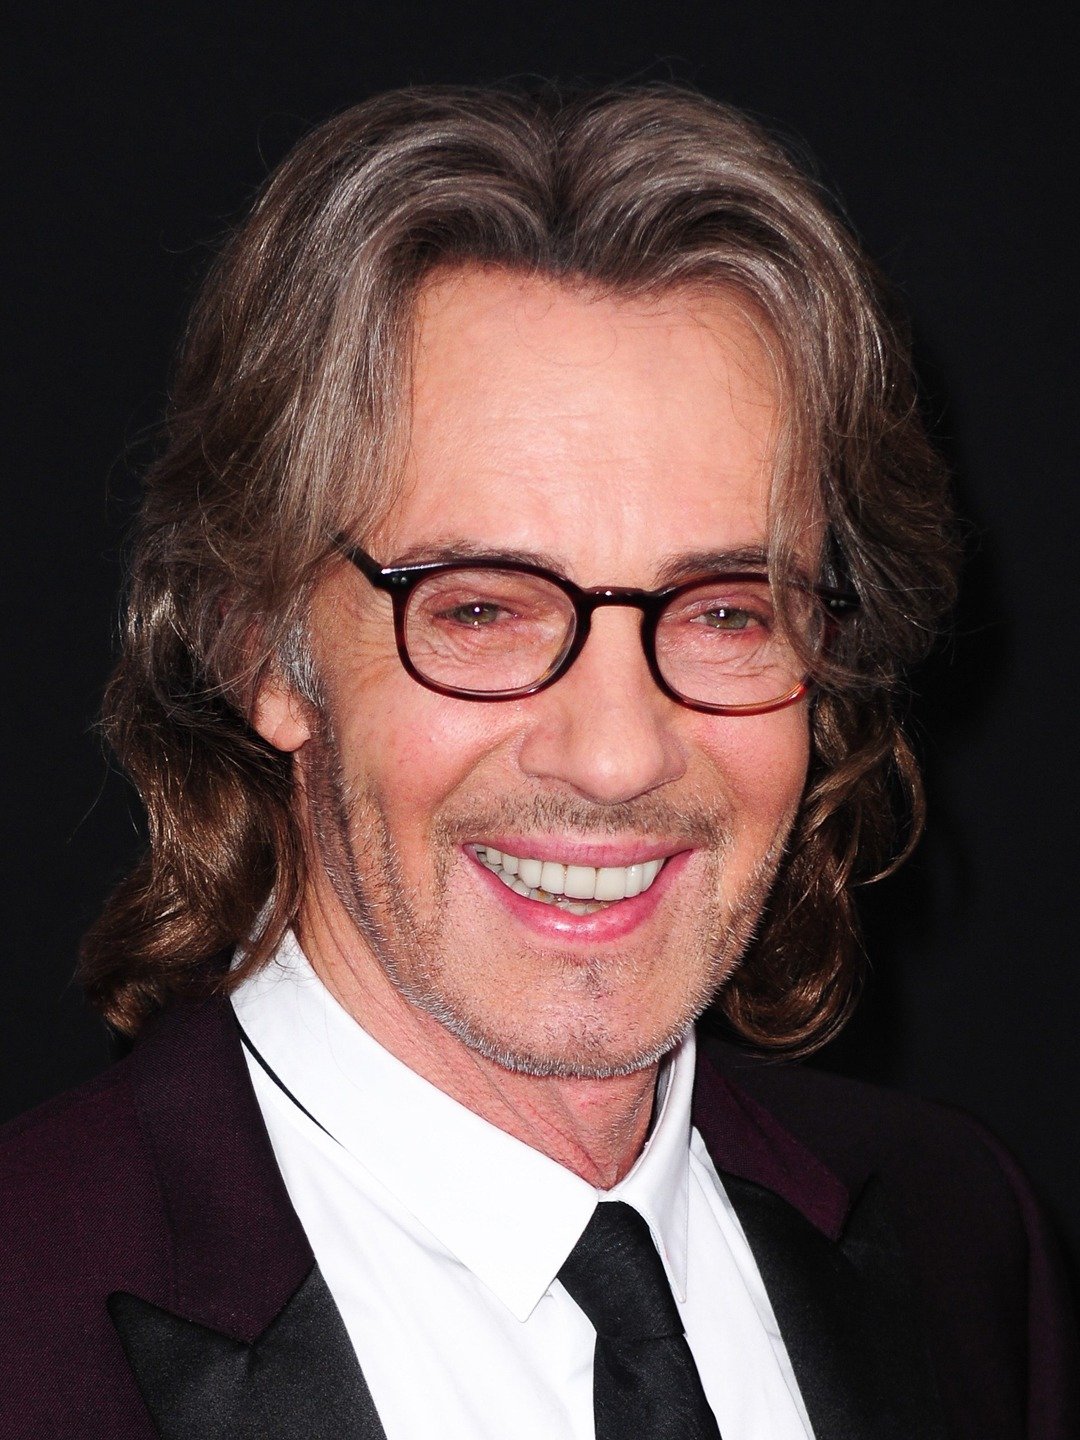 How tall is Rick Springfield?